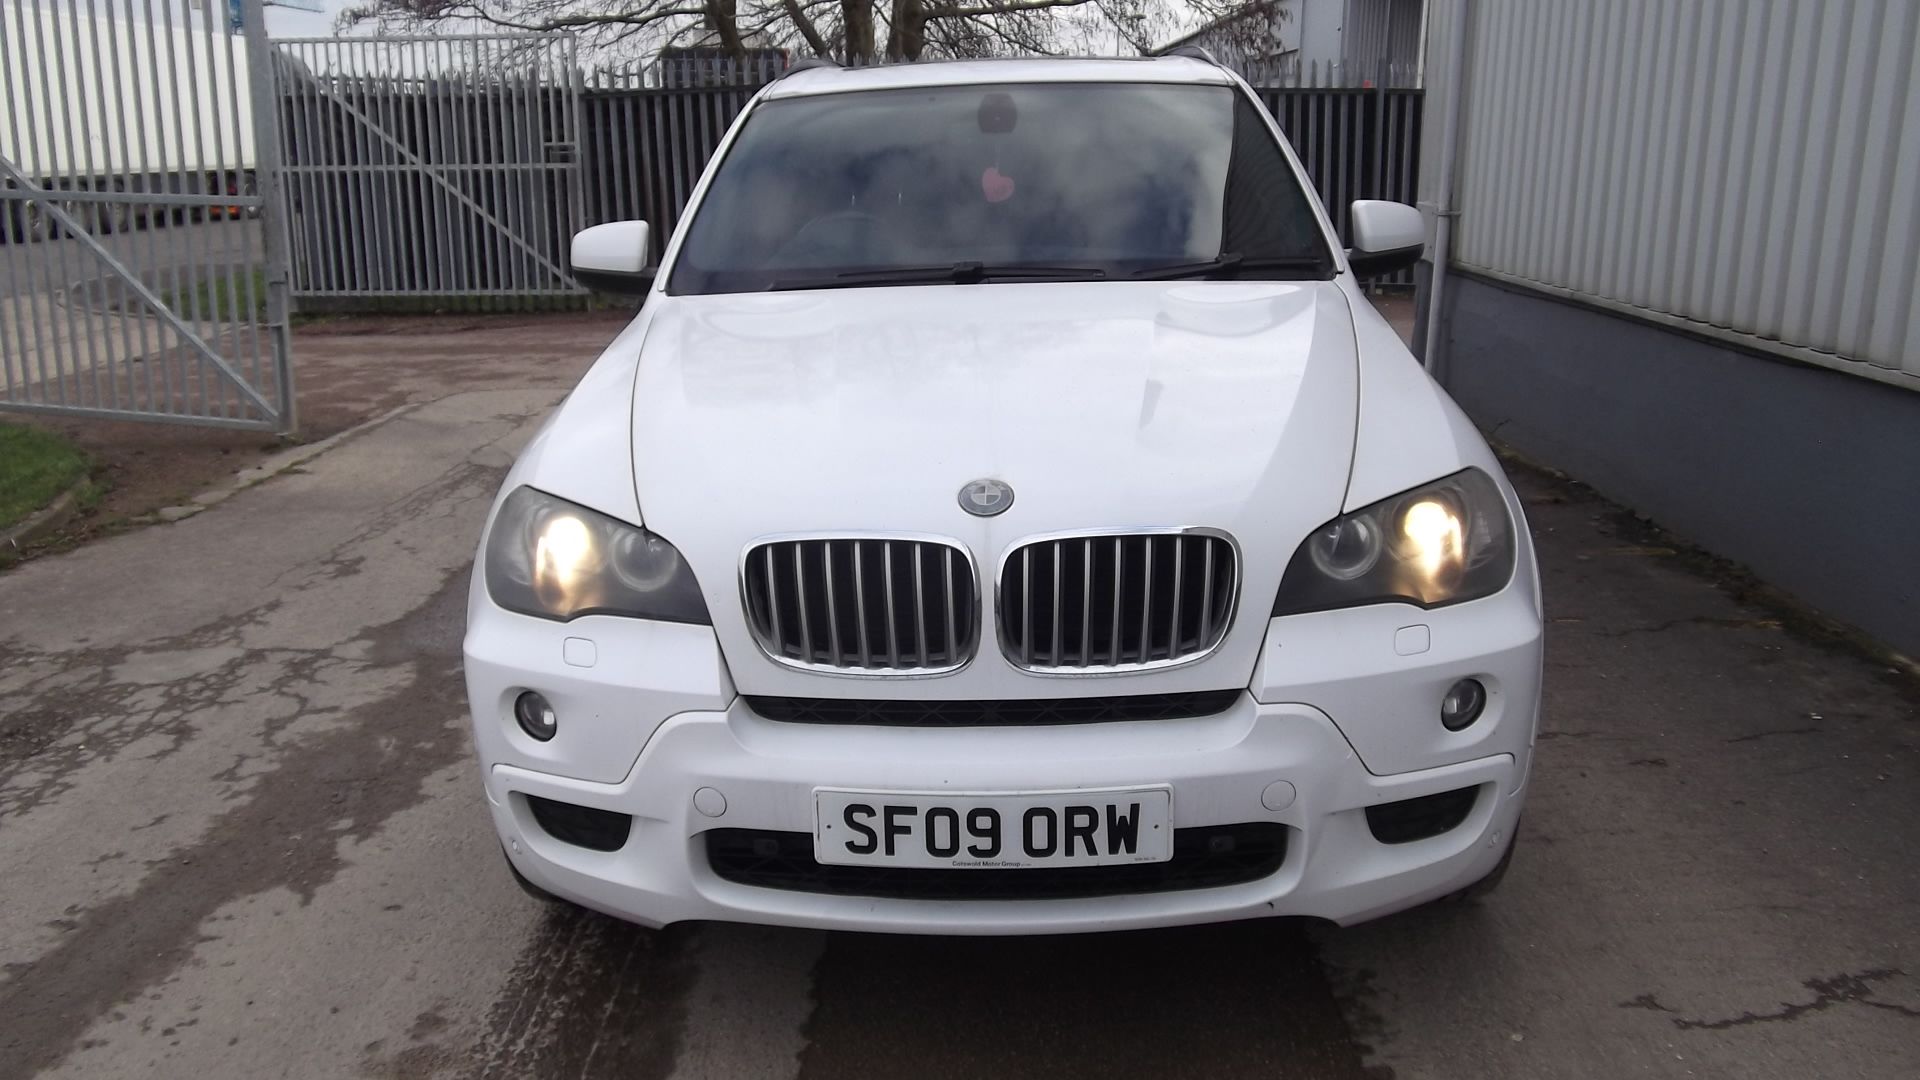 2009 BMW X5 35D M Sport X Drive 3.0 5 Dr 4x4 - CL505 - NO VAT ON THE HAMM - Image 18 of 22